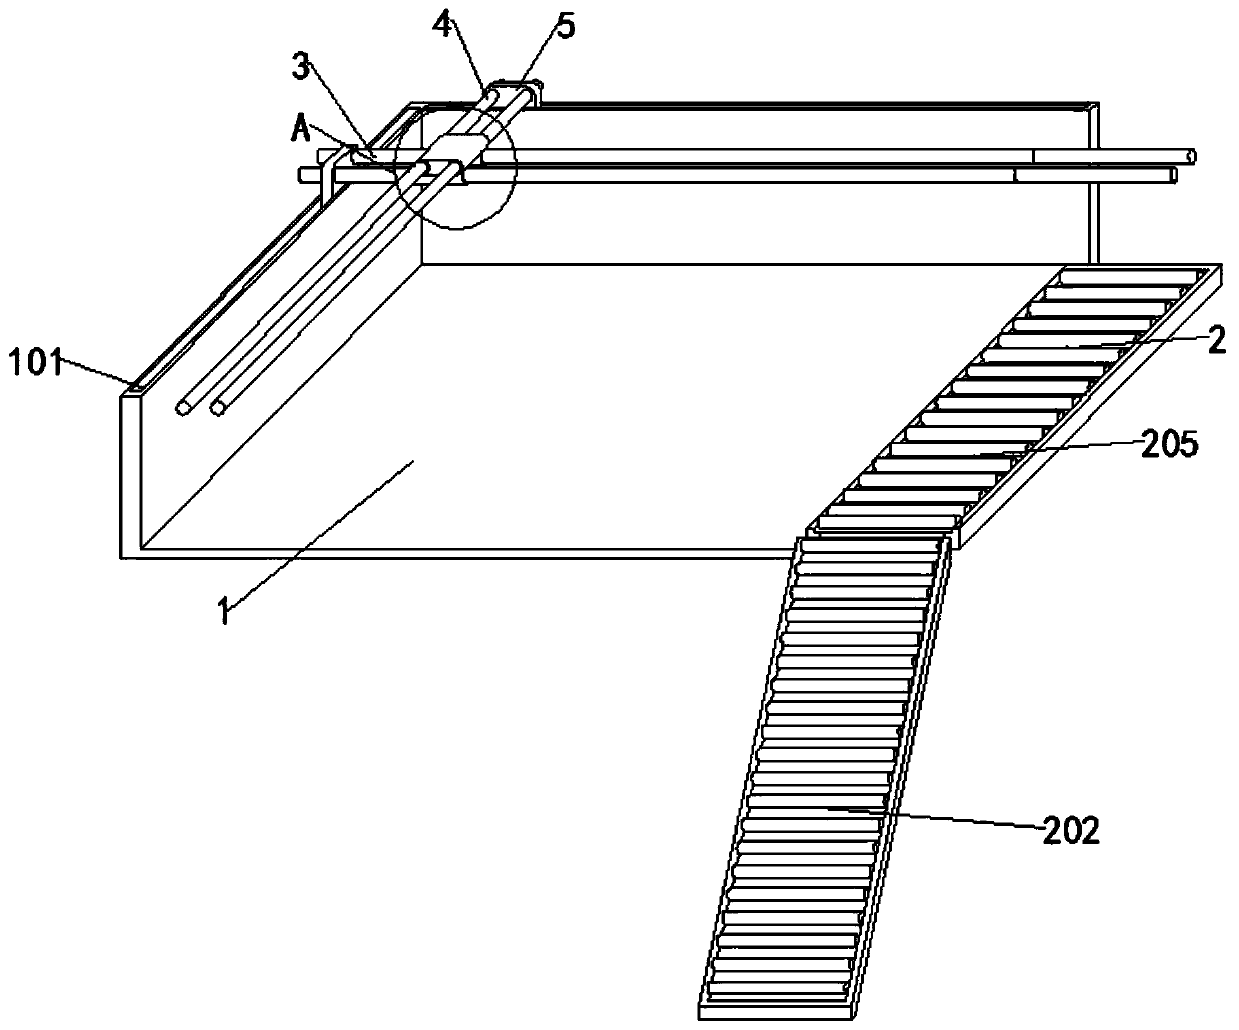 Biaxial multi-directional grounding carrying type semi-automatic road step laying device